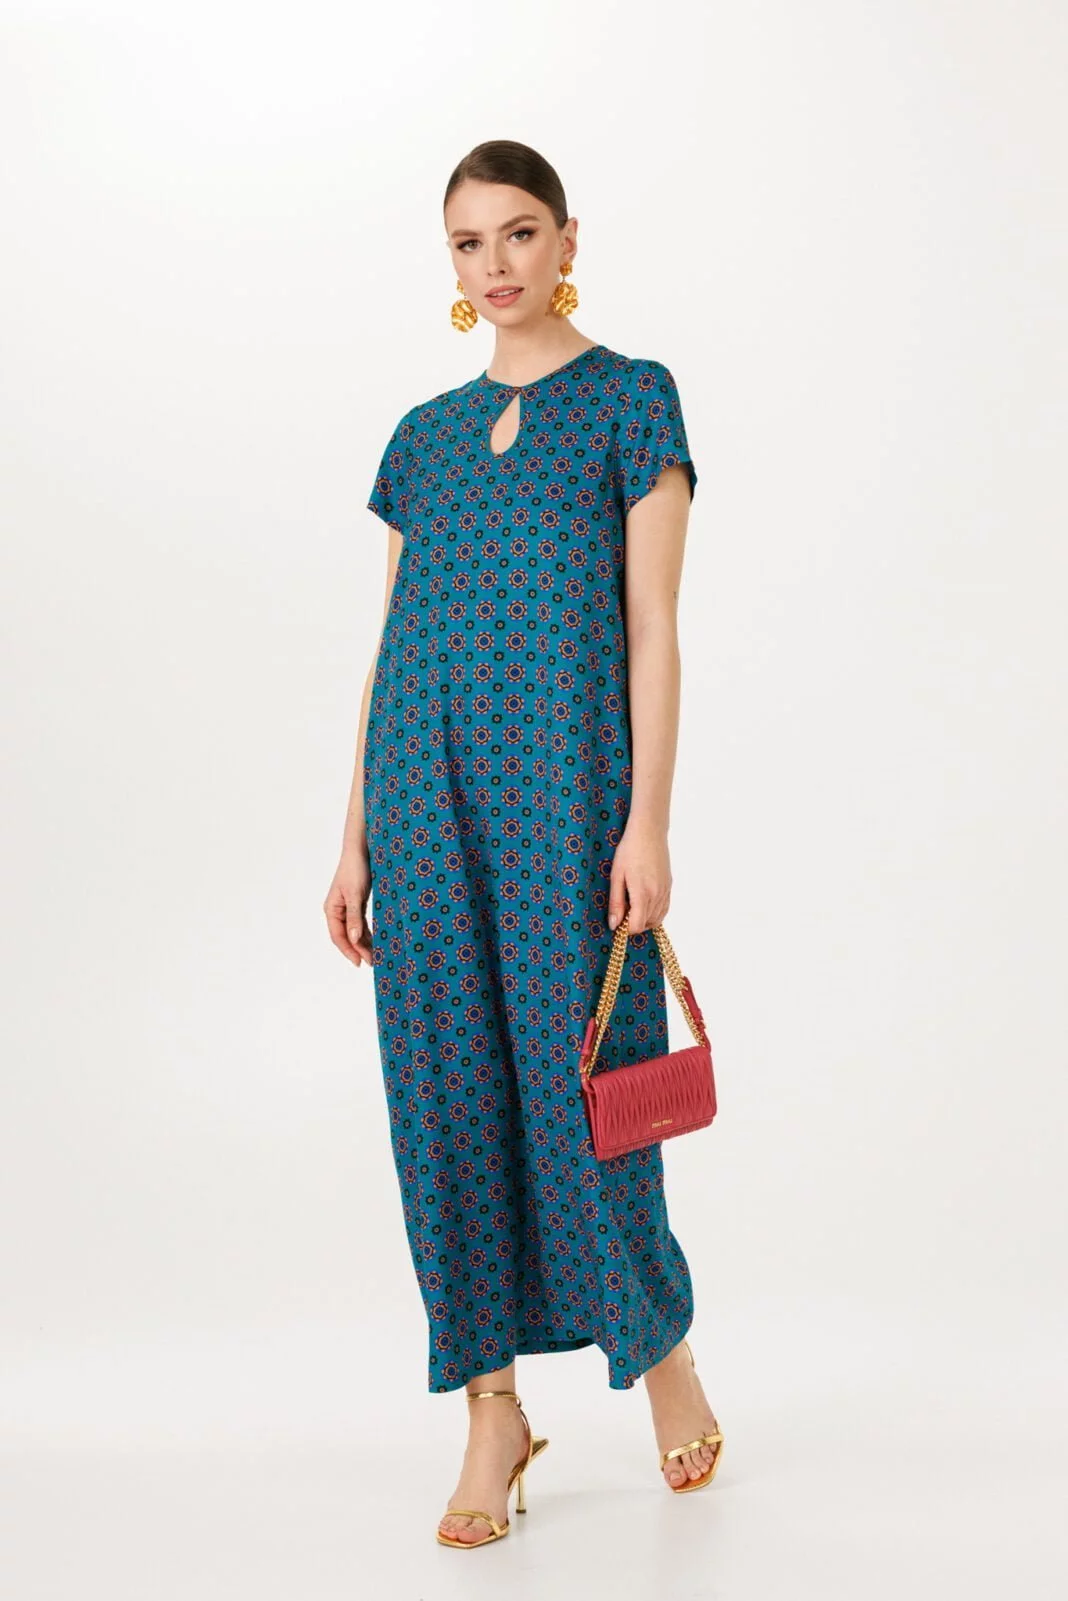 Summer Evening Walks Turquoise Kaftan Dress - Maxi Loose Fit for Beach Vacation